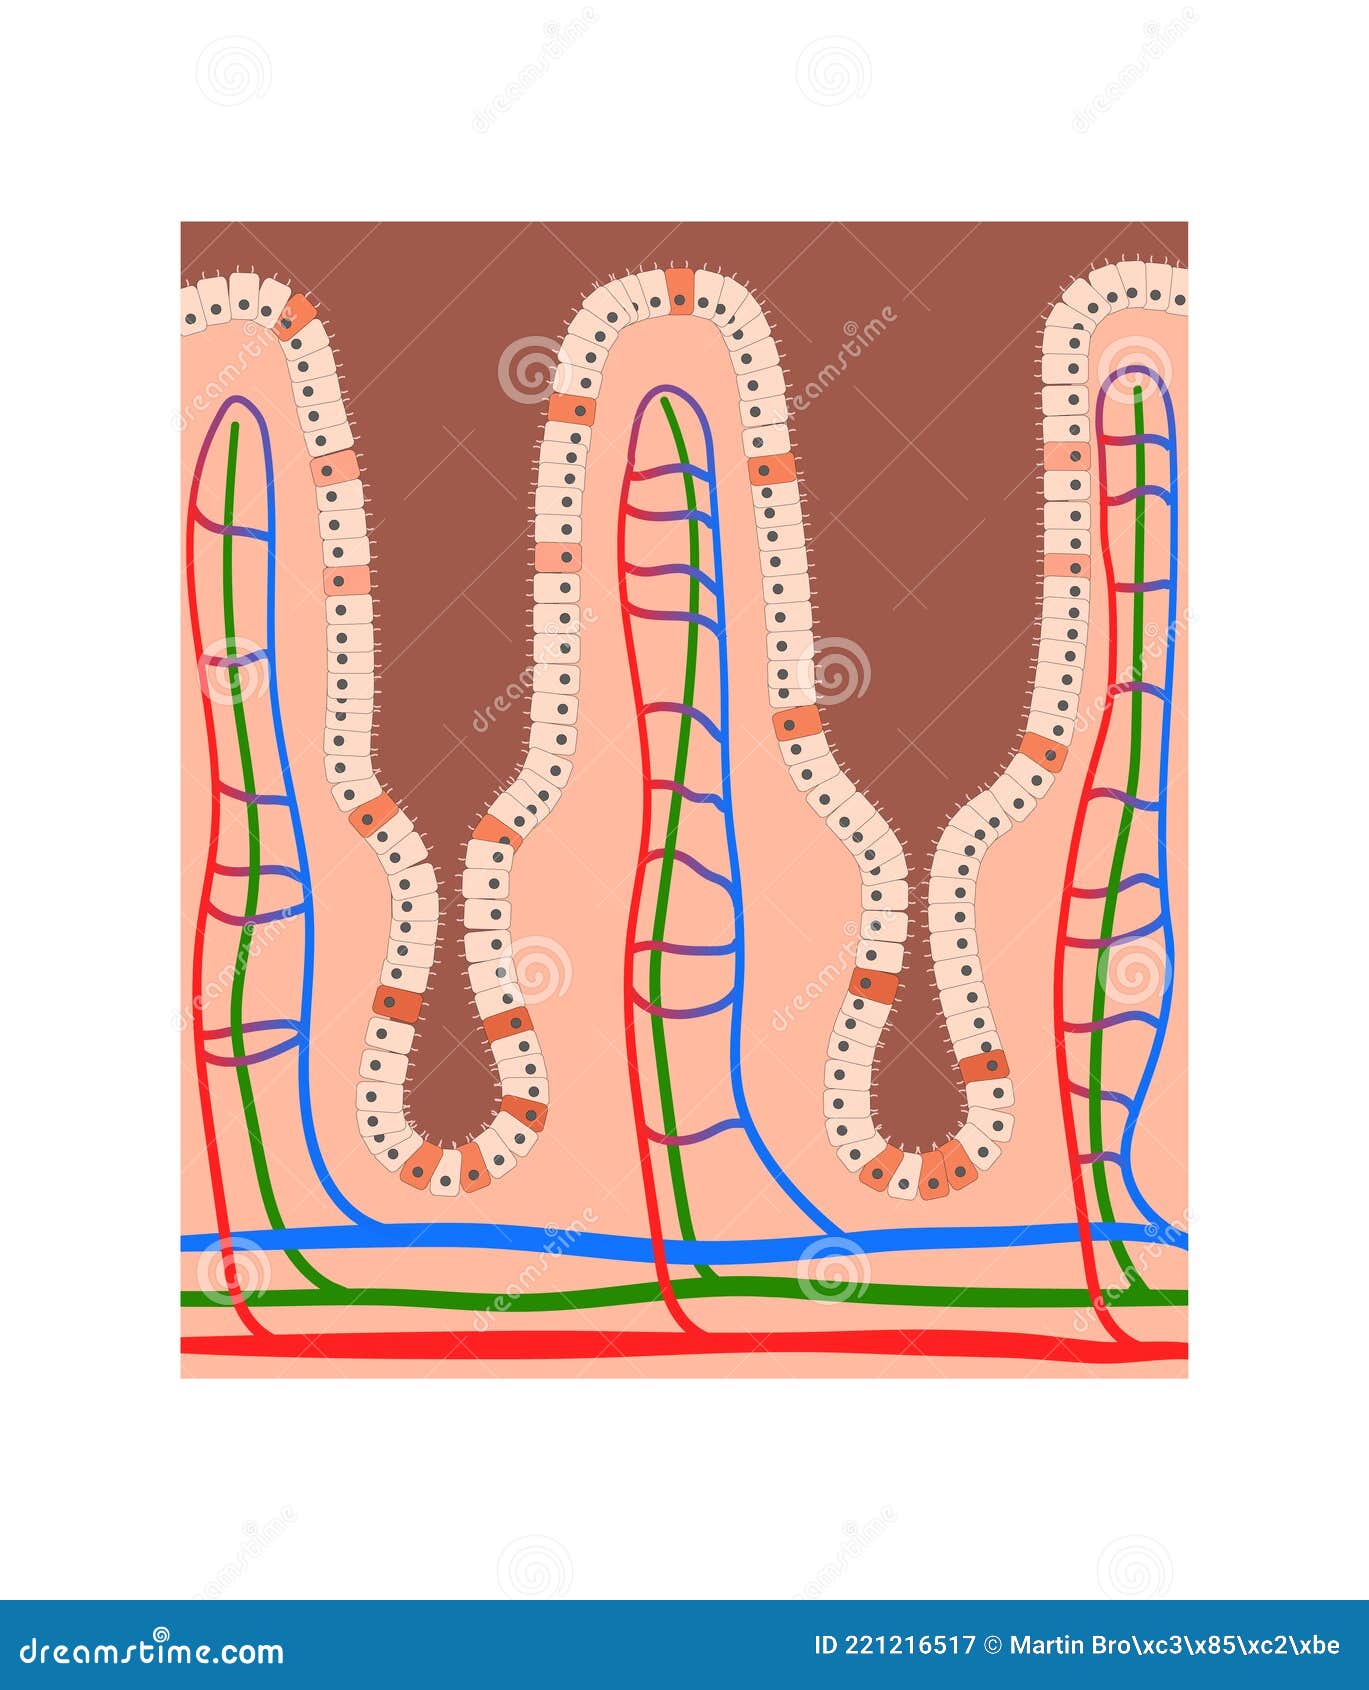 intestinal villi anatomy, epithelial cells with microvilli and capillary network detailed 